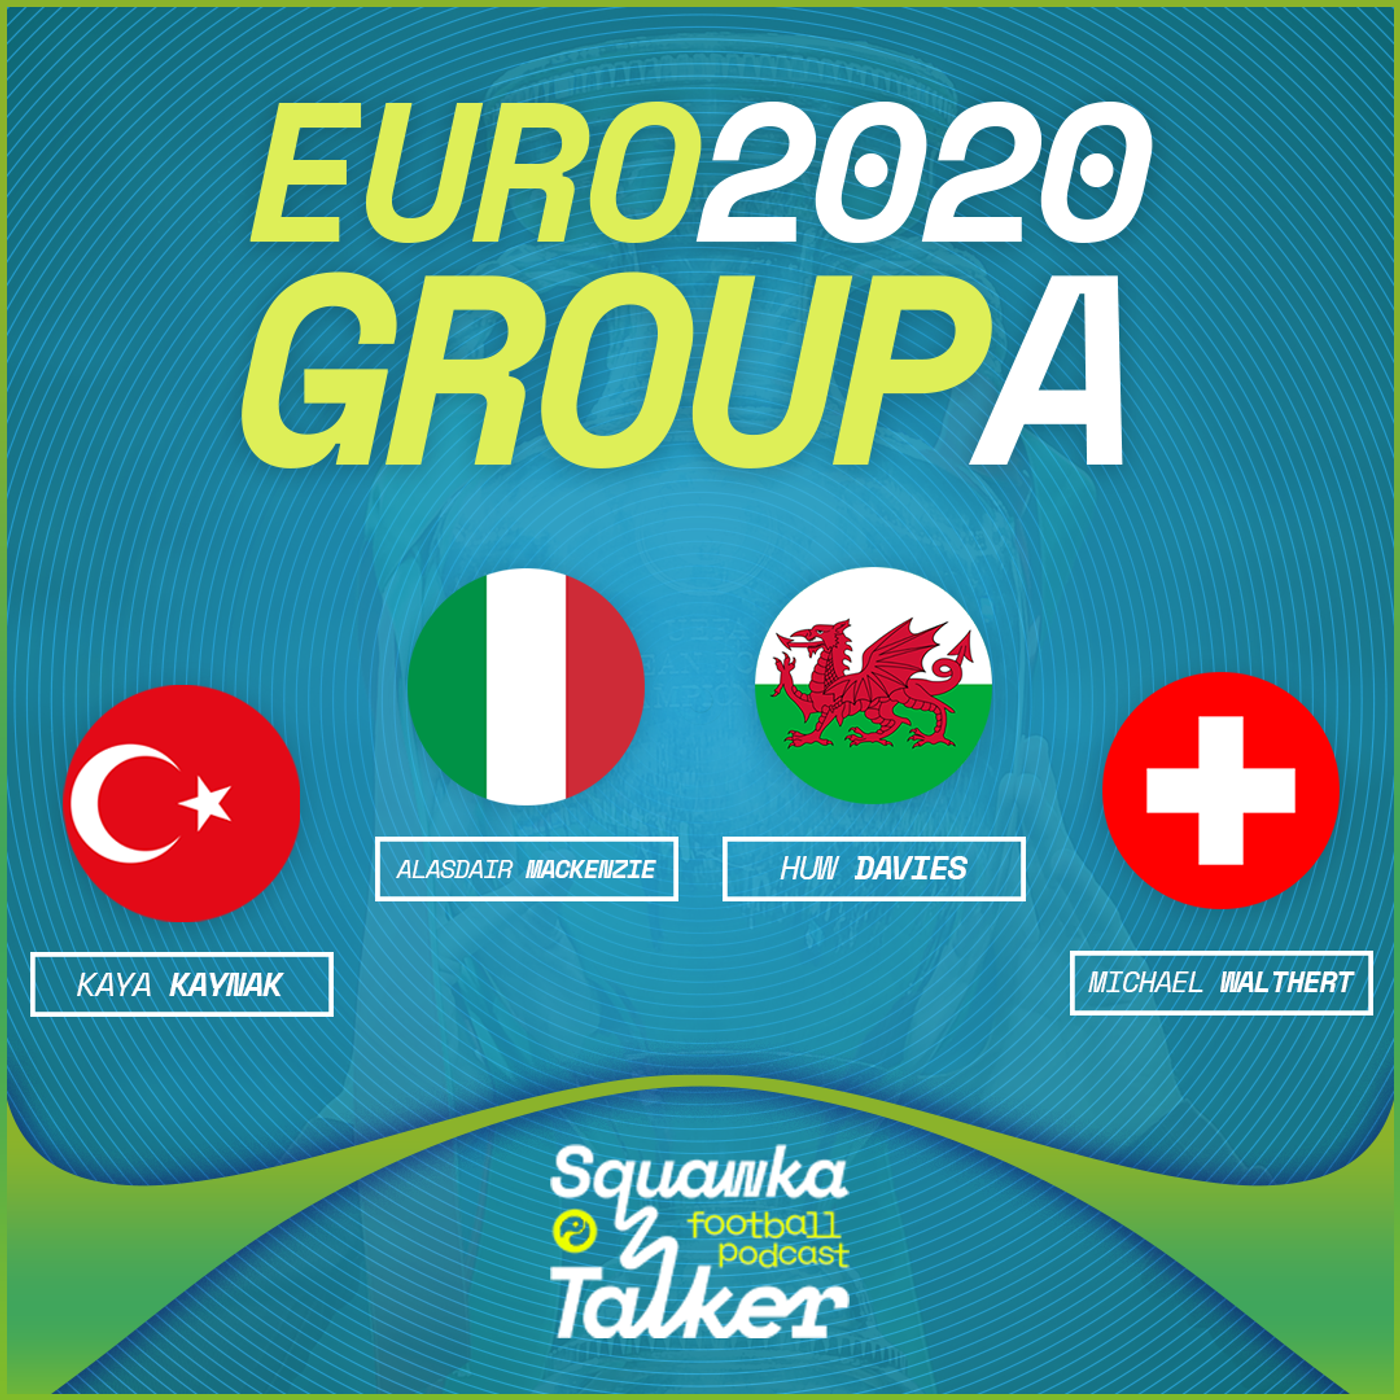 EURO 2020: Your complete guide to Group A